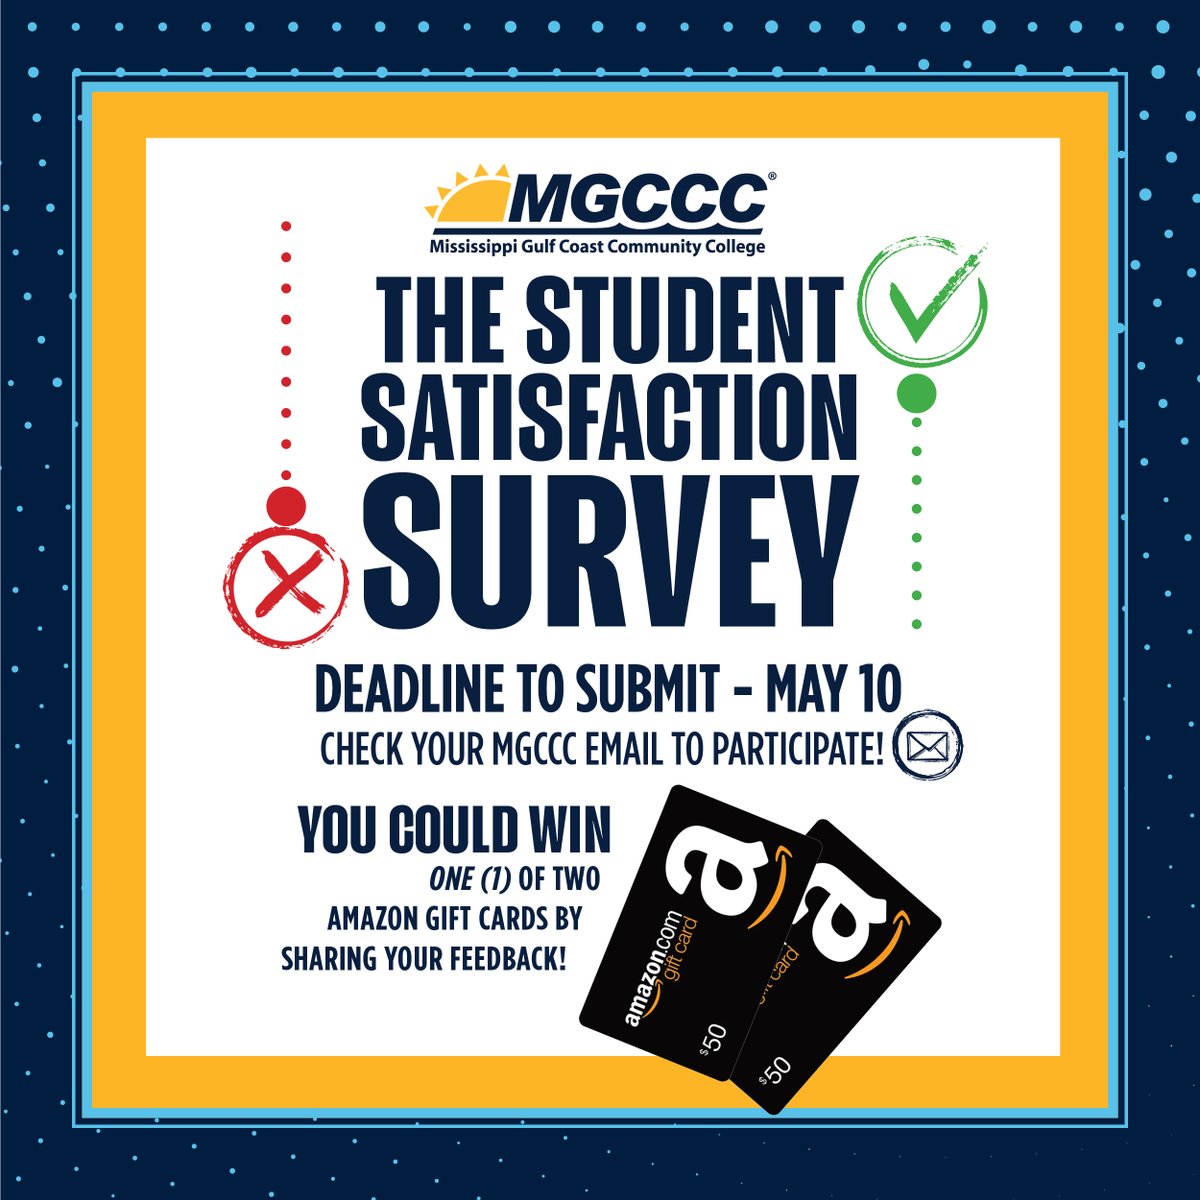 Share your MGCCC experience with us! Check your MGCCC email to find your student satisfaction survey. Plus, you could win an Amazon Gift card for sharing your feedback! The deadline is May10th! For more information, contact Mitzi Carriker at mitzi.carriker@mgccc.edu